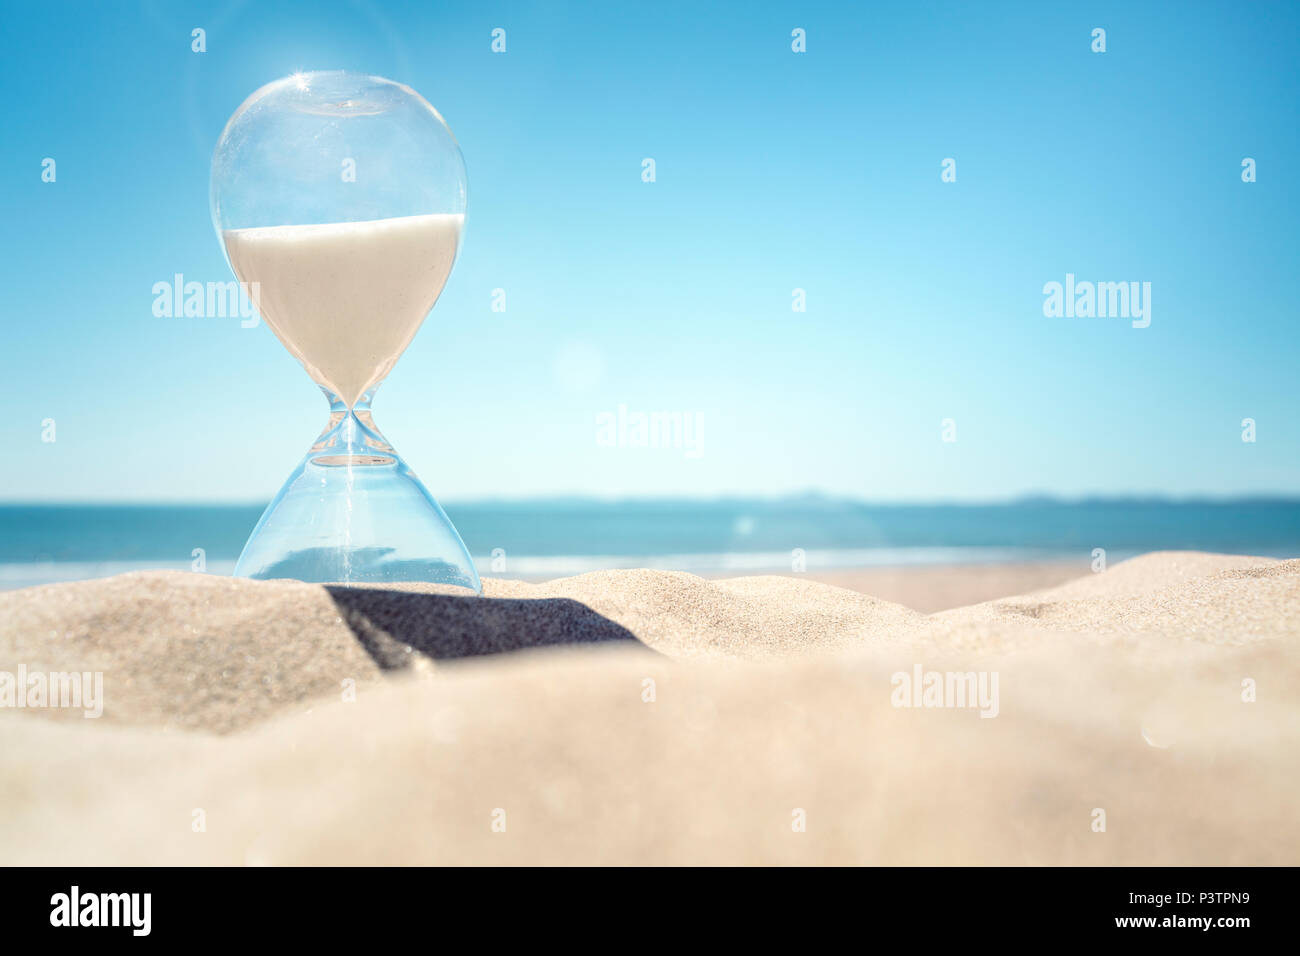 Hourglass time on a beach in the sand with blue sky and copy space Stock Photo